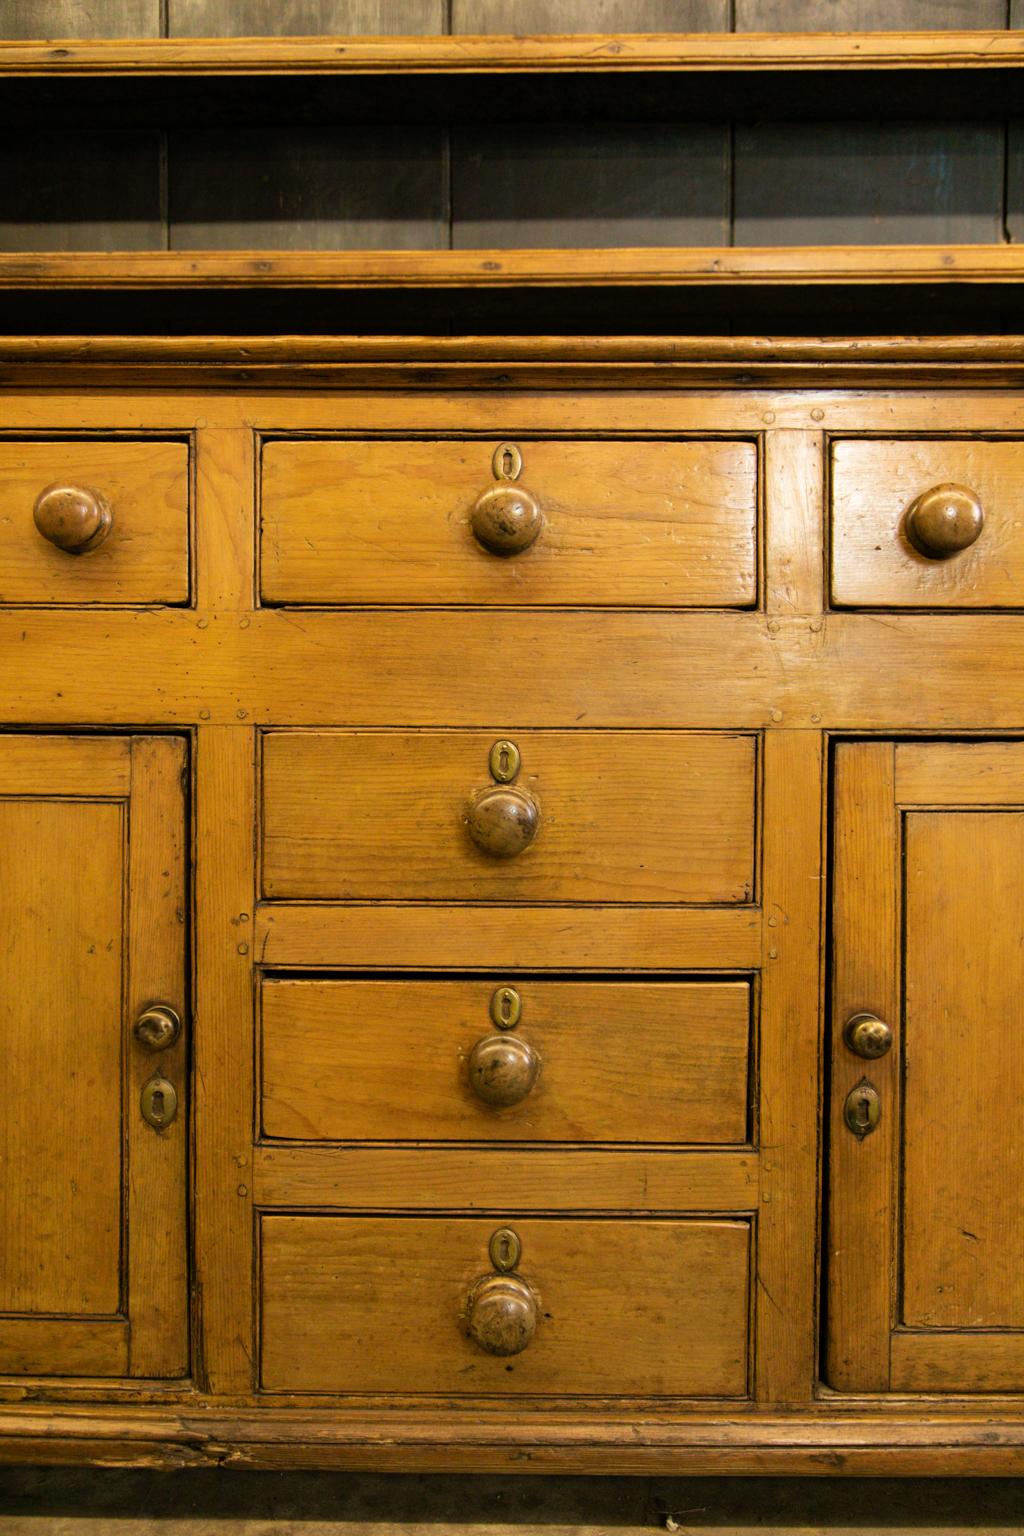 English pine welsh dresser has its original wooden knobs. The top has fixed plate rails, but these could be removed. There are six working drawers and two doors in the lower half.
   